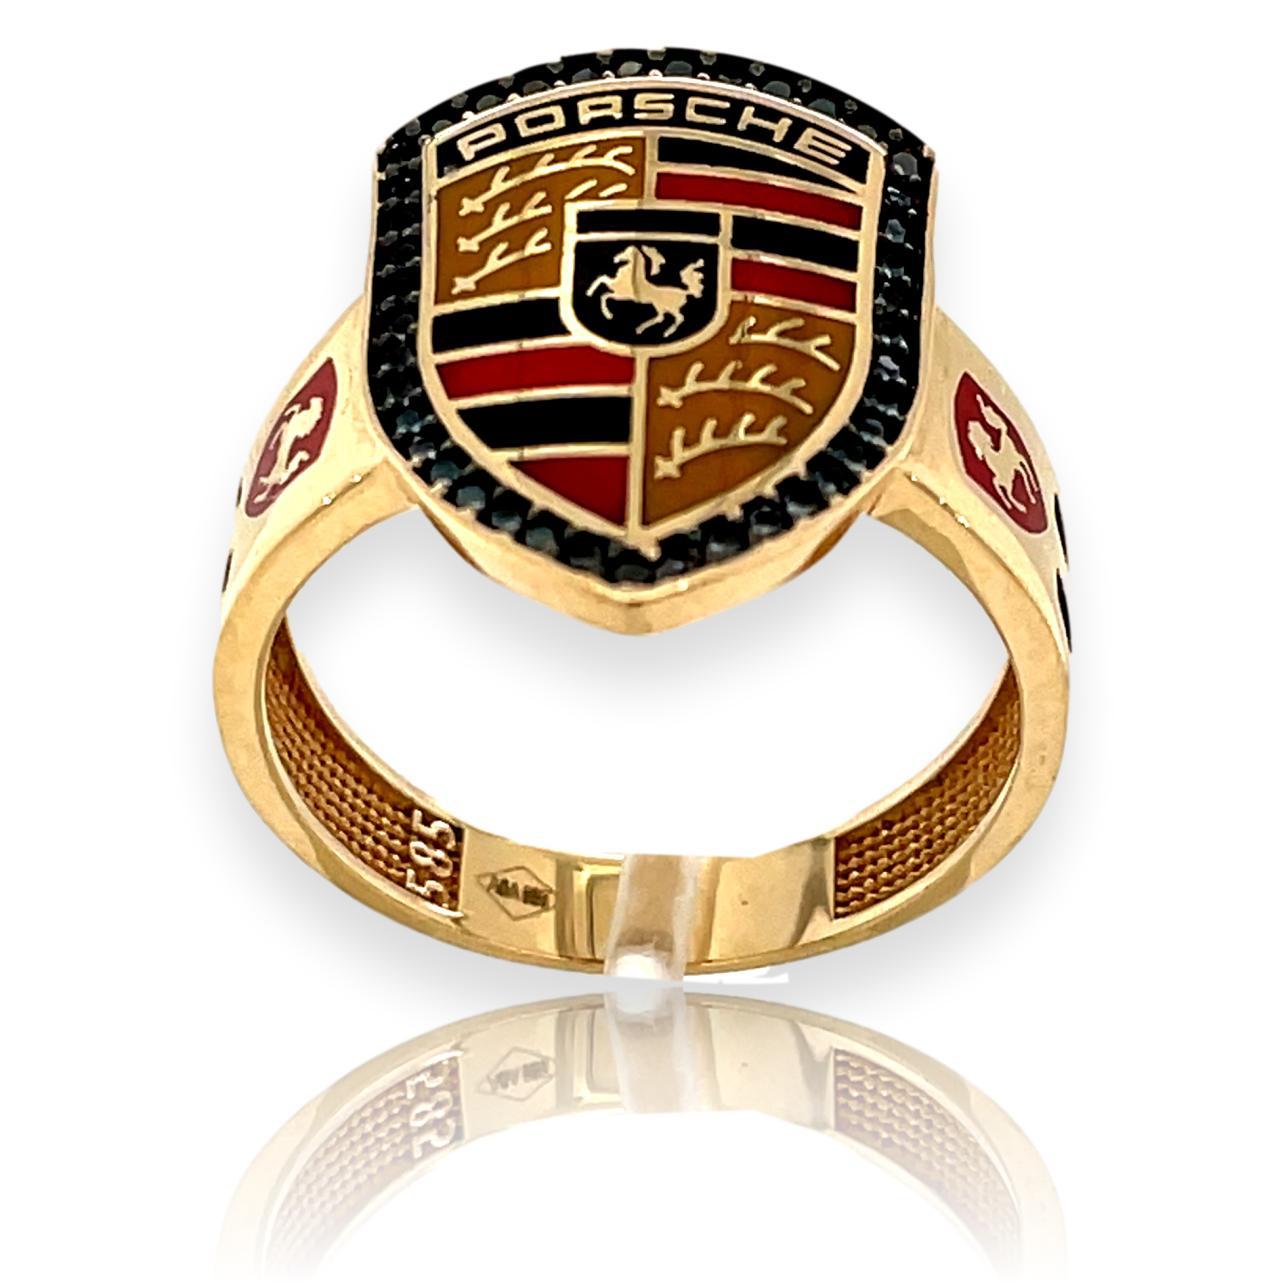 Mixed Cut Gold Porsche Cigar Band Ring with Enamel and Black Spinel